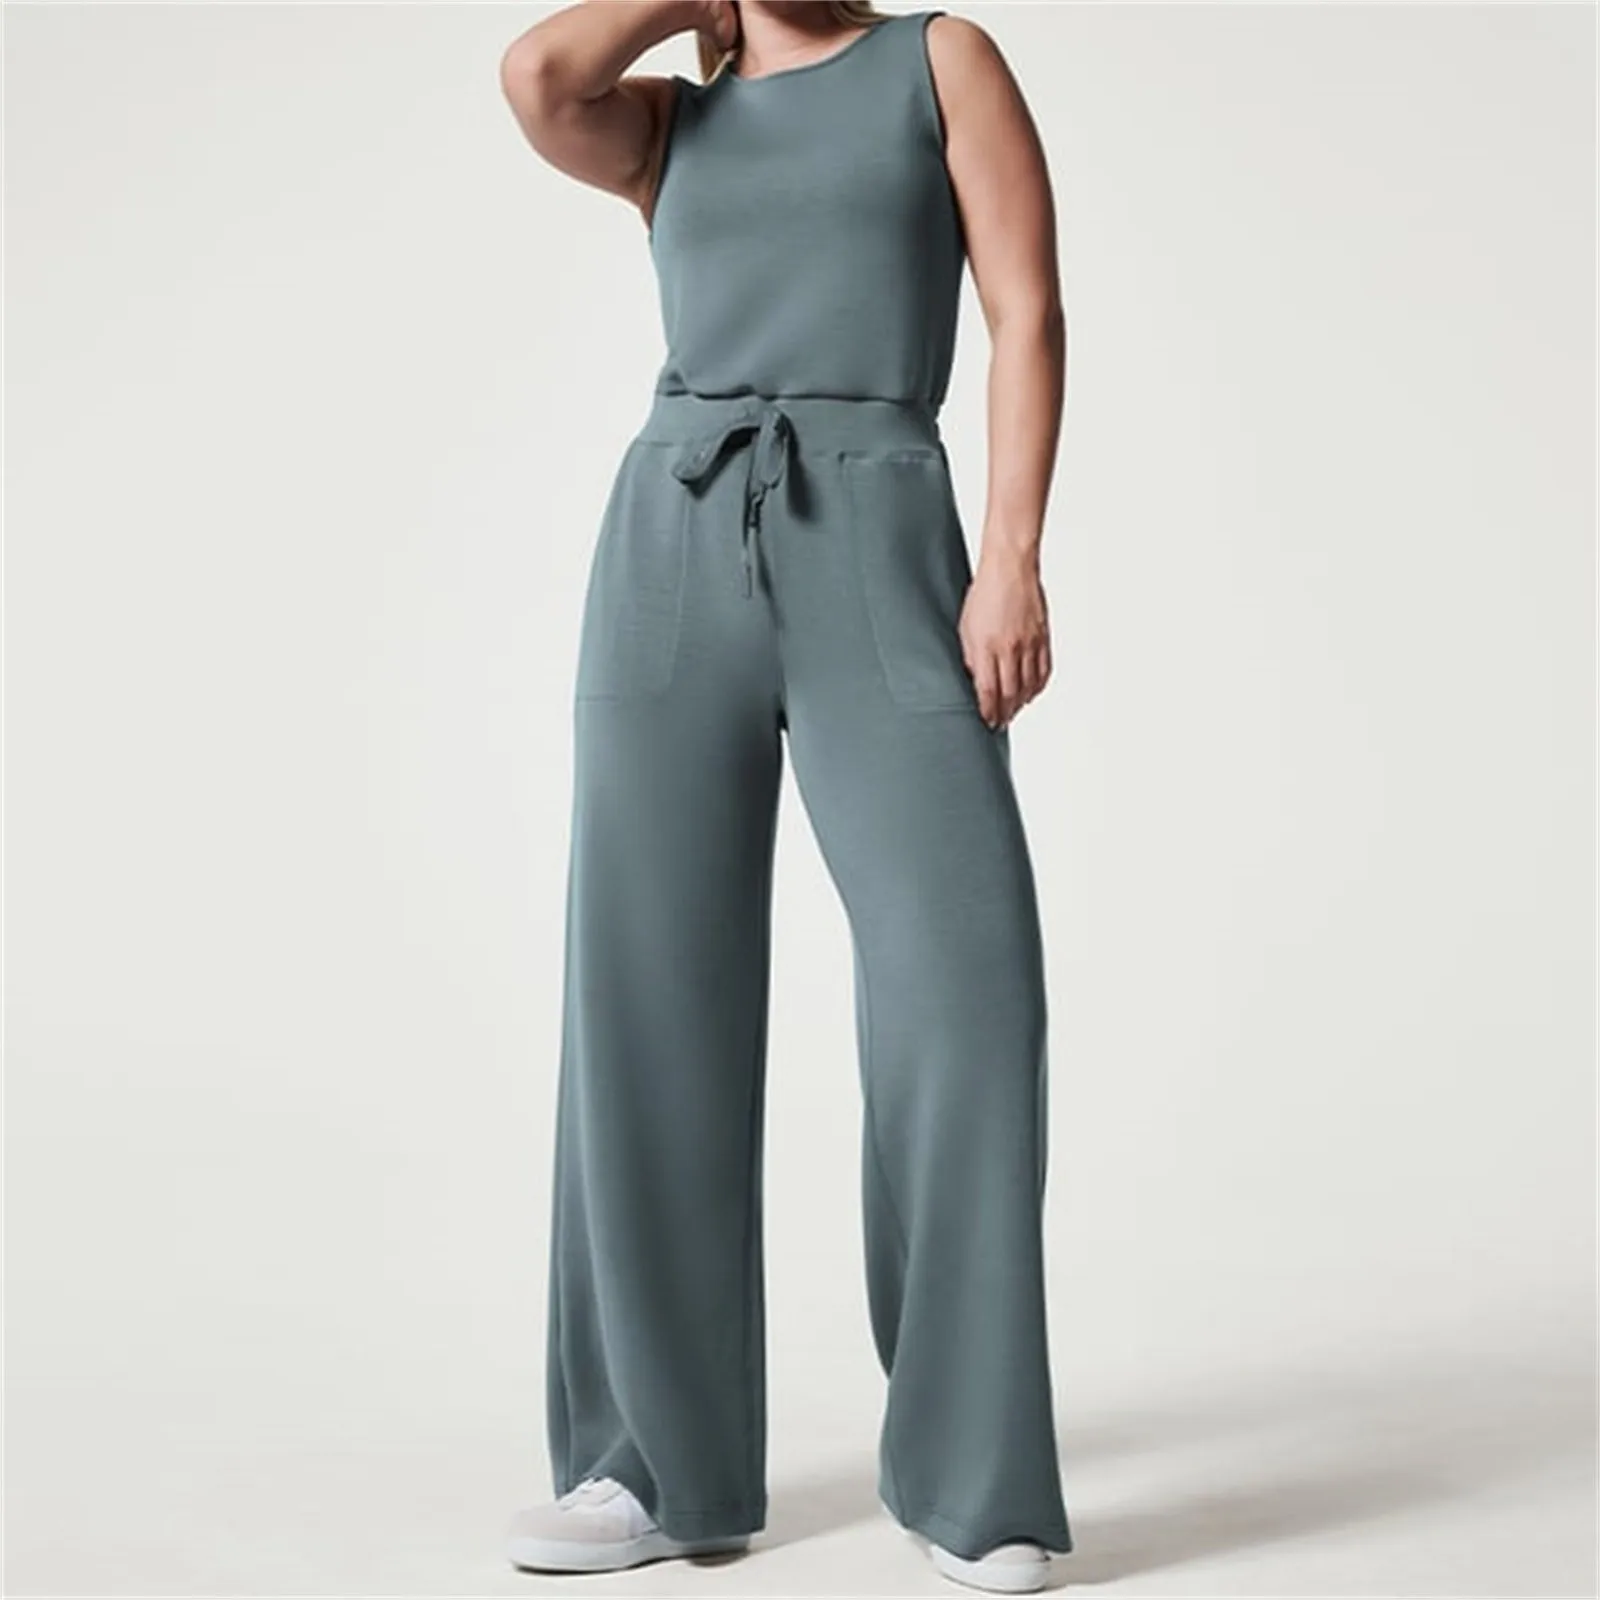 2023 New Jumpsuits for Women Casual Air Essentials Jumpsuit Ladies Summer Sleeveless Jumpsuit with Pockets Belted Wide Leg Pant 2023 new jumpsuits for women casual air essentials jumpsuit ladies summer sleeveless jumpsuit with pockets belted wide leg pant